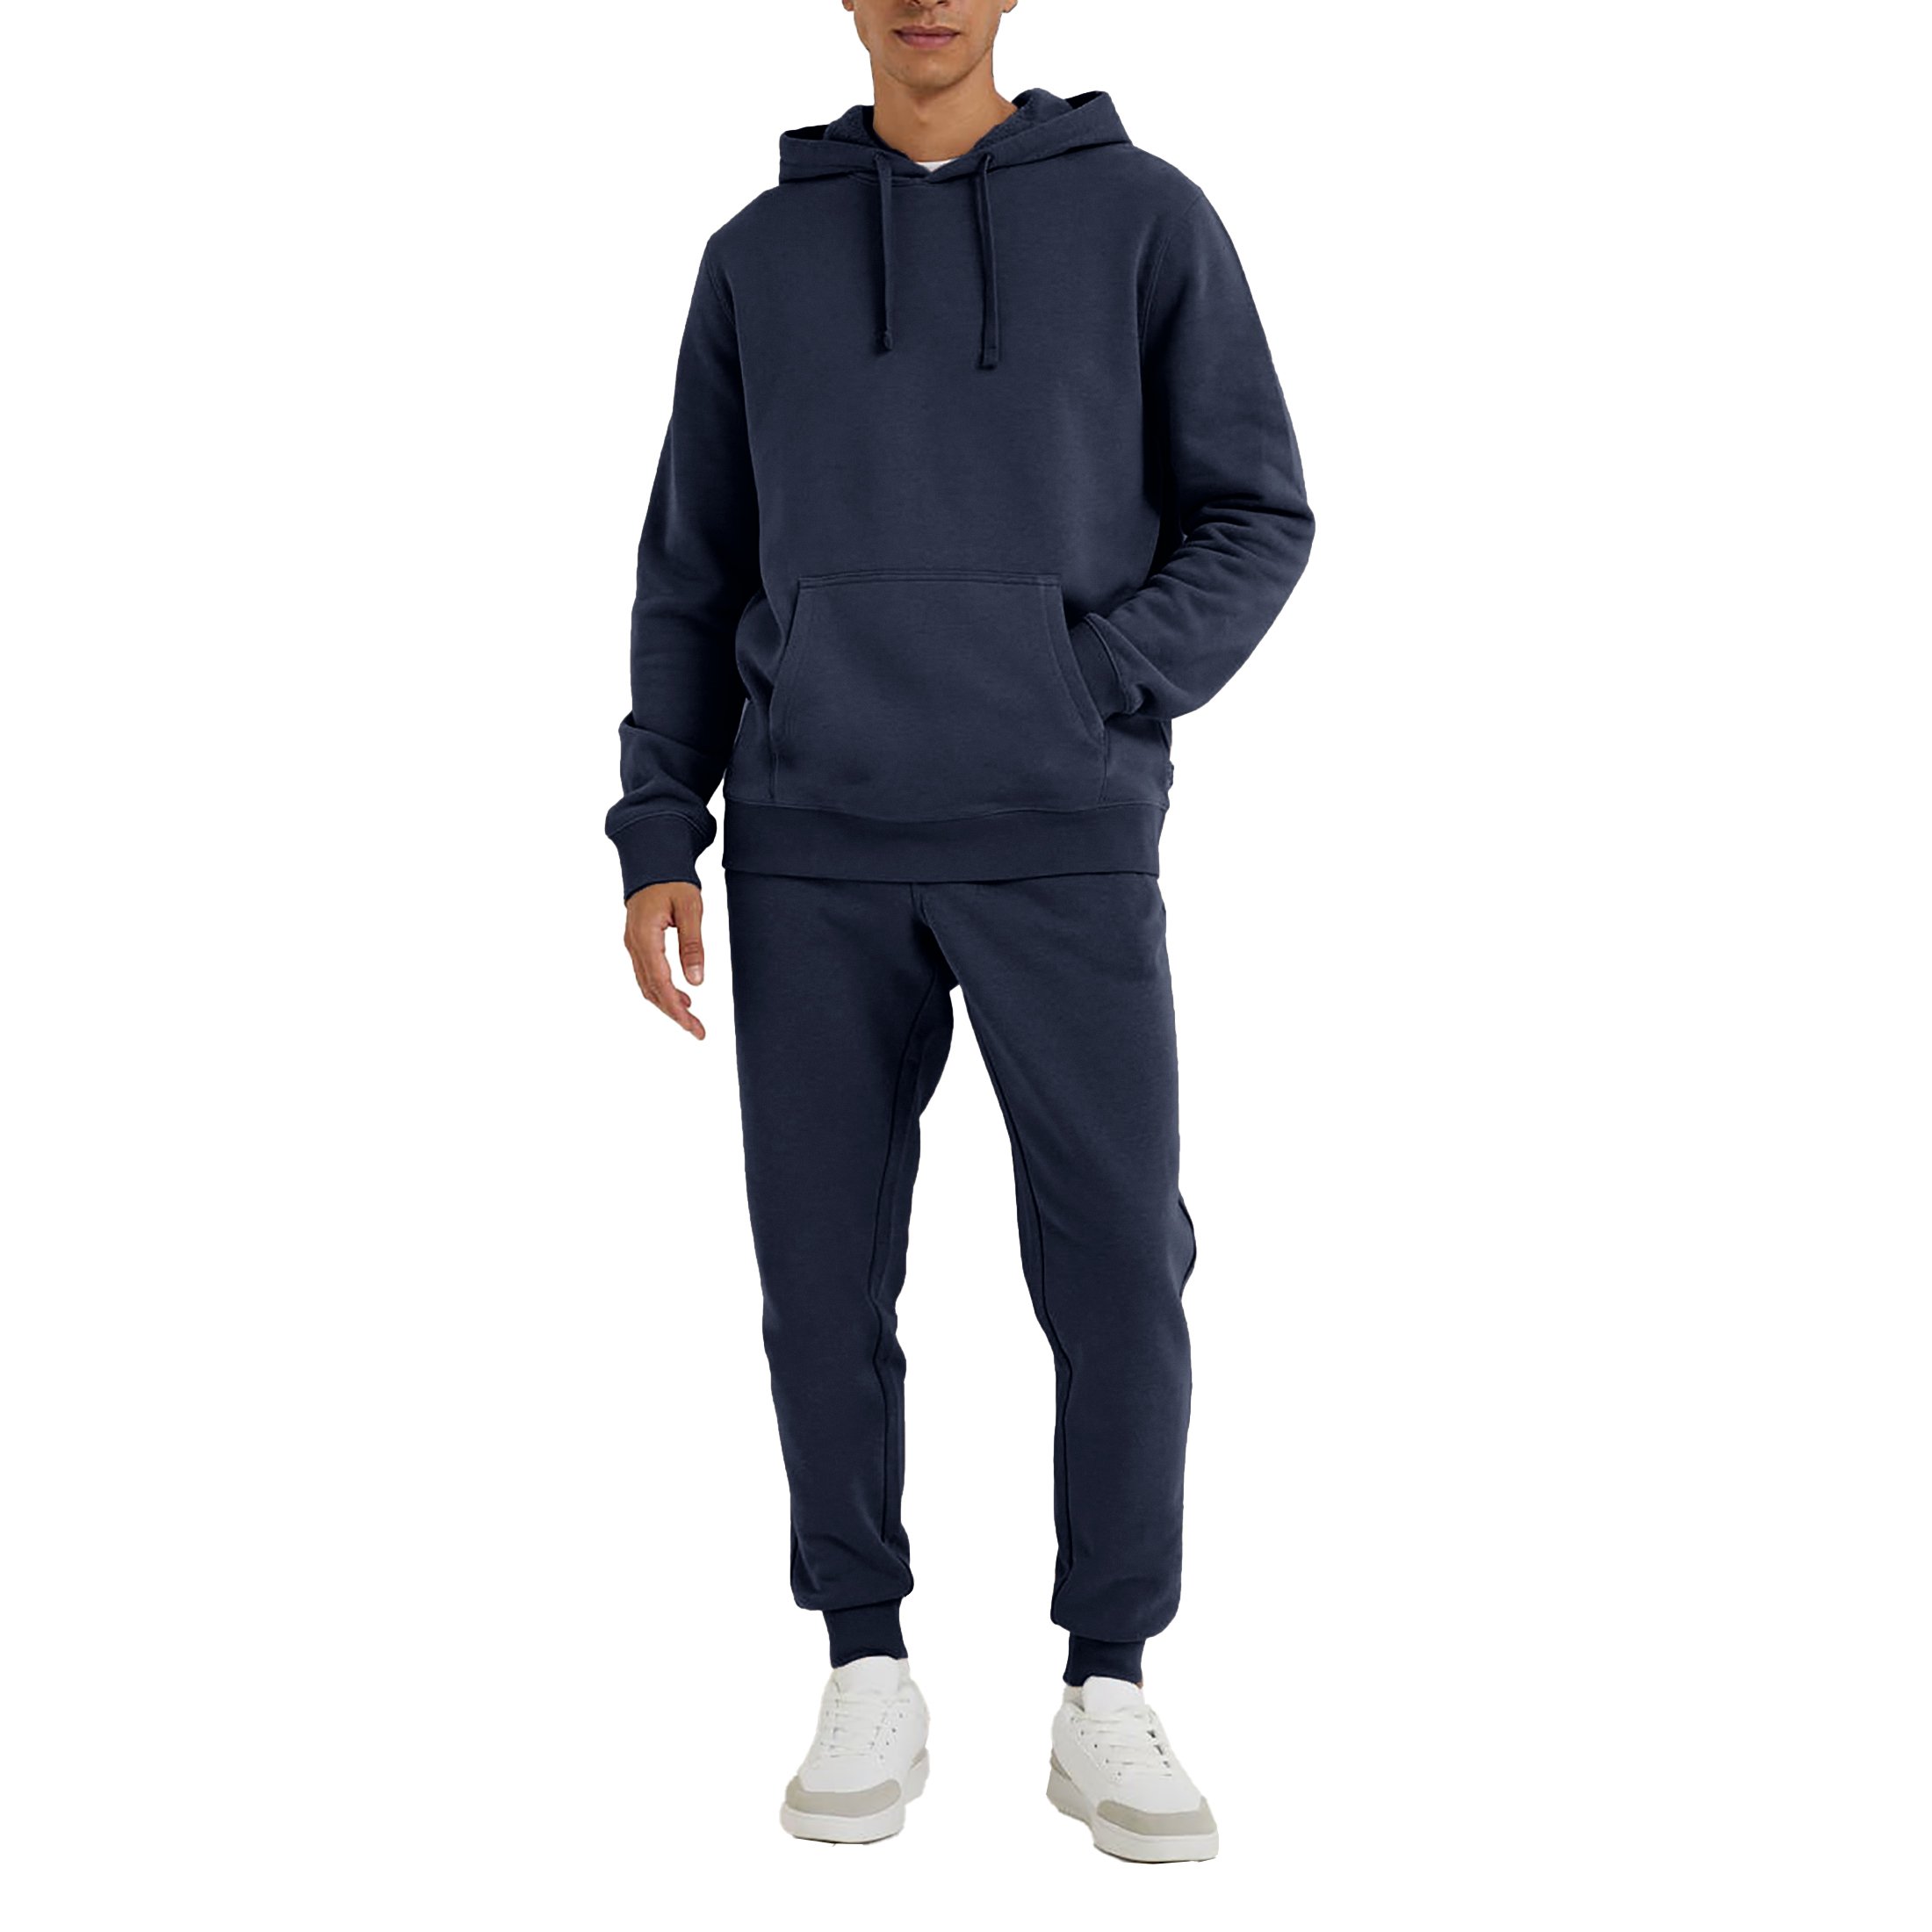 Men's Athletic Warm Jogging Pullover Active Tracksuit - Navy, Large